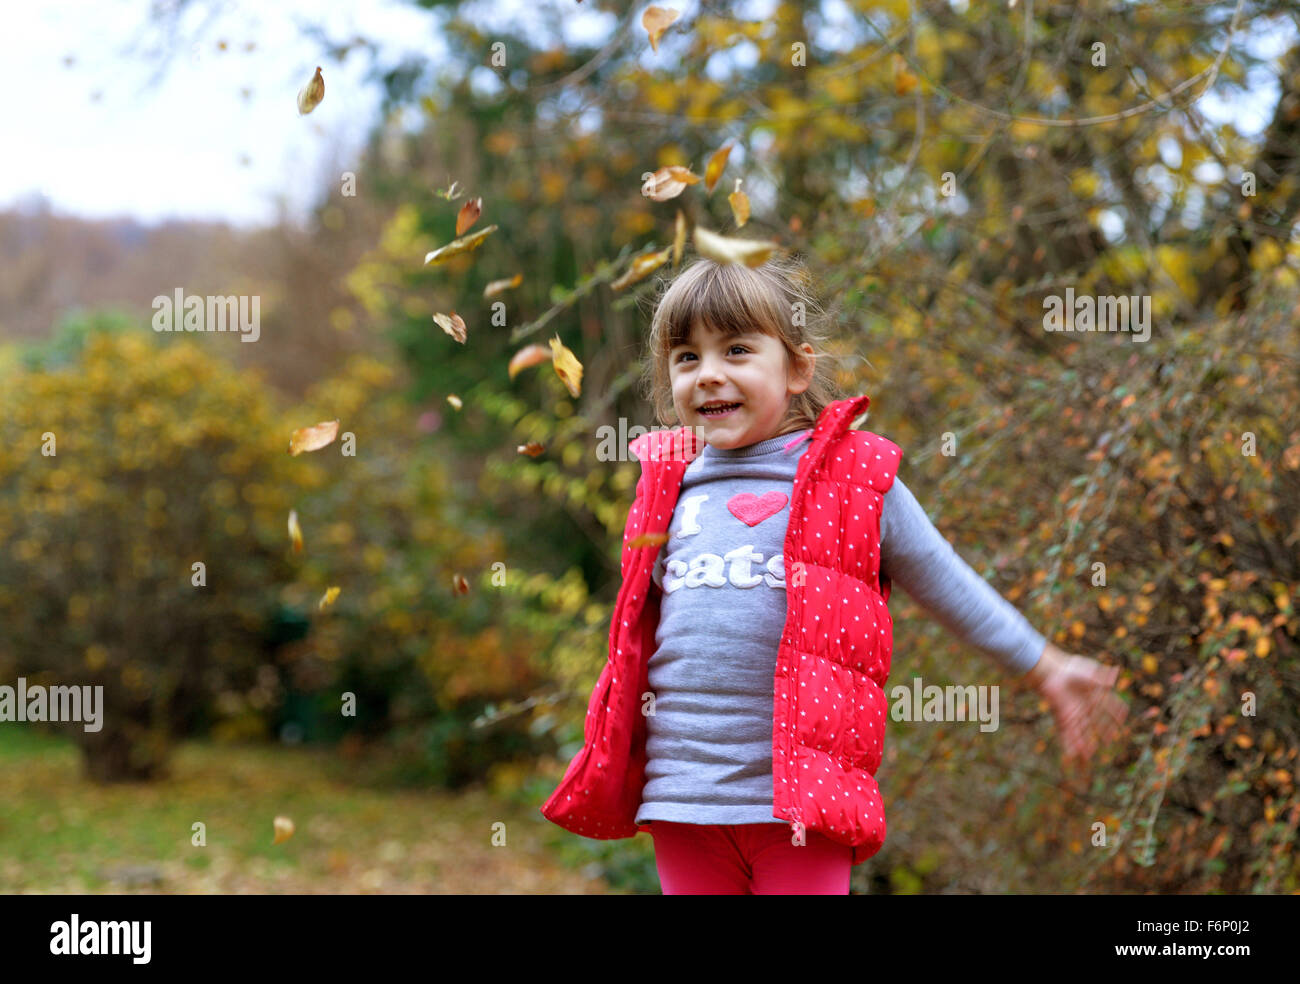 A gril throwing leaves in the autumn garden. Stock Photo